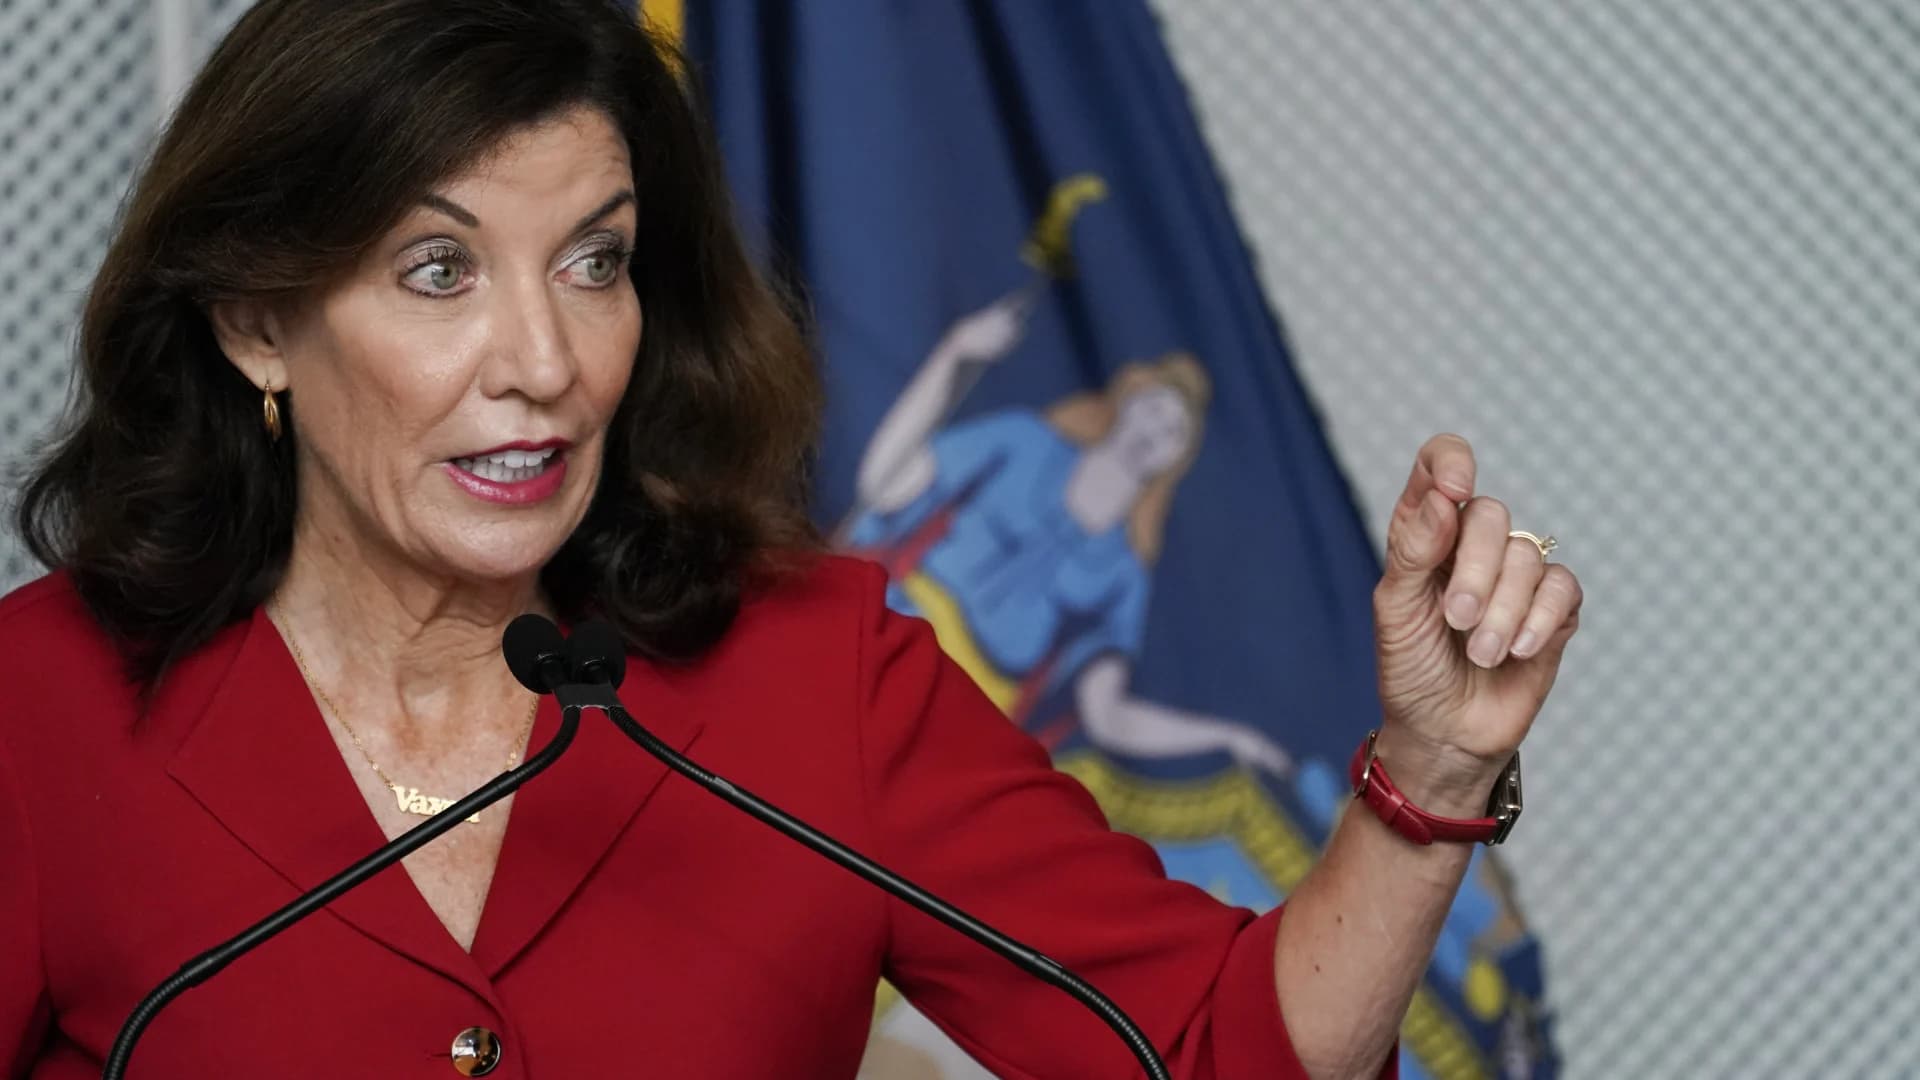 Gov. Hochul announces plans to increase capacity, enhance safety of the LIE